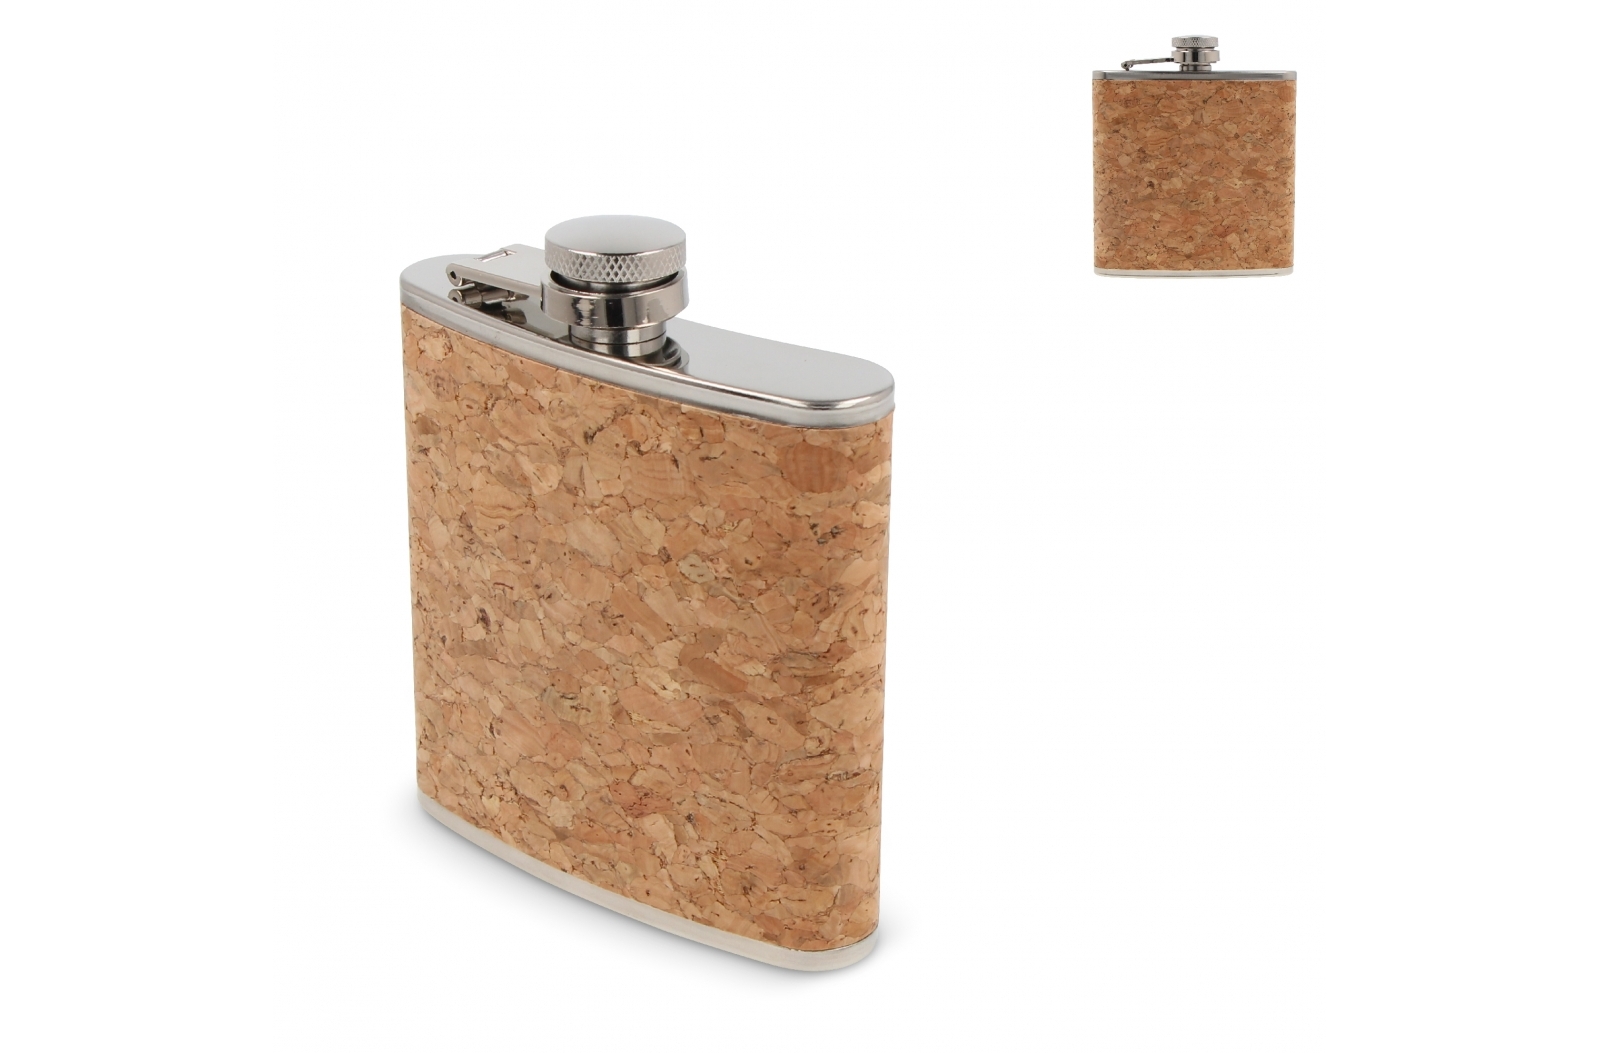 170ml Hip-flask with a cork - Stockton-on-Tees